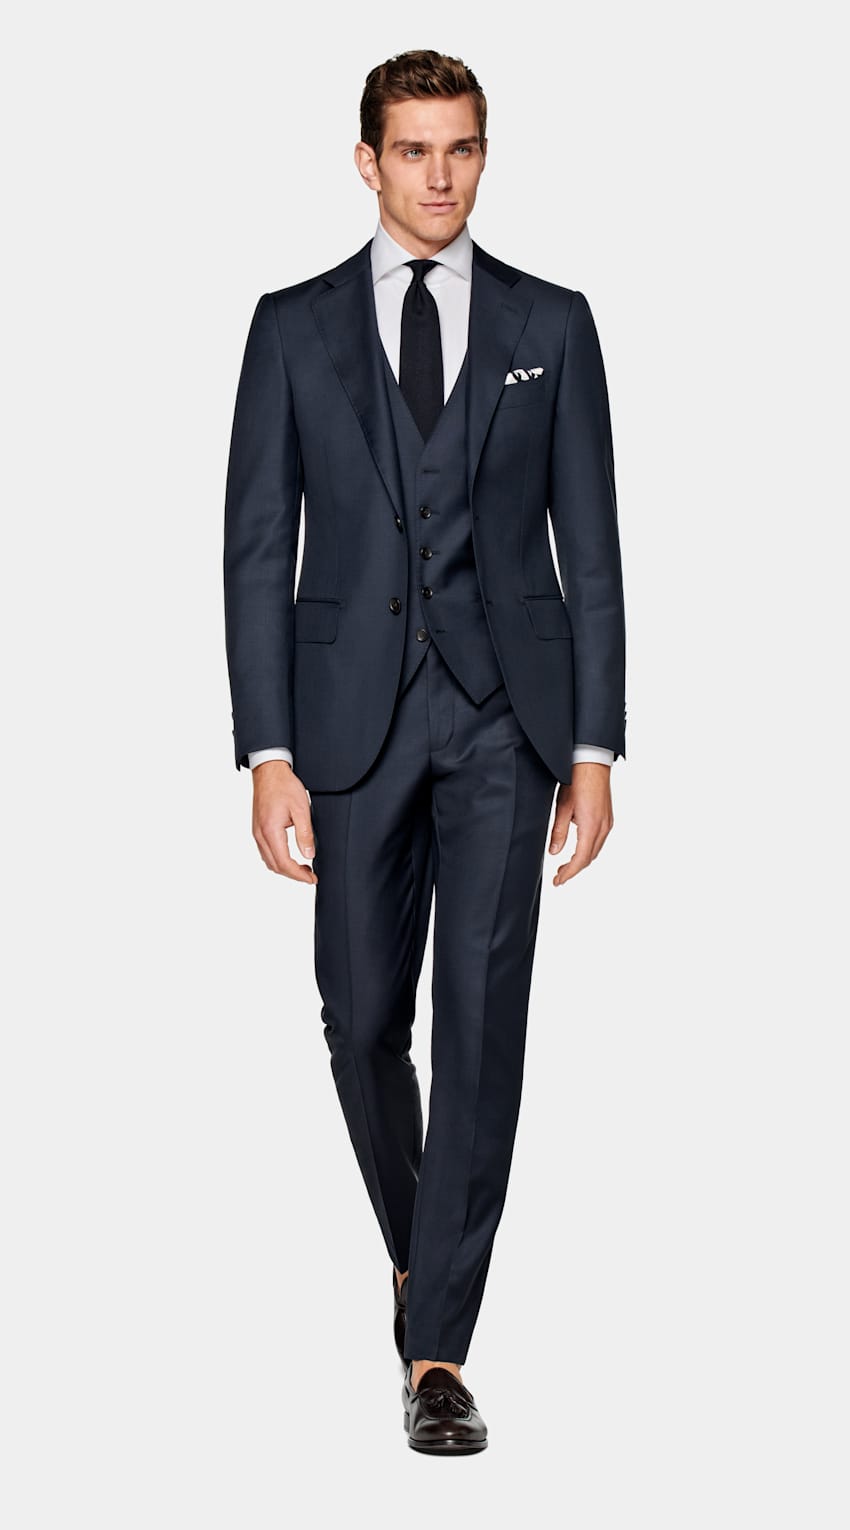 SUITSUPPLY Pure Wool S110's by Vitale Barberis Canonico, Italy Navy Three-Piece Lazio Suit